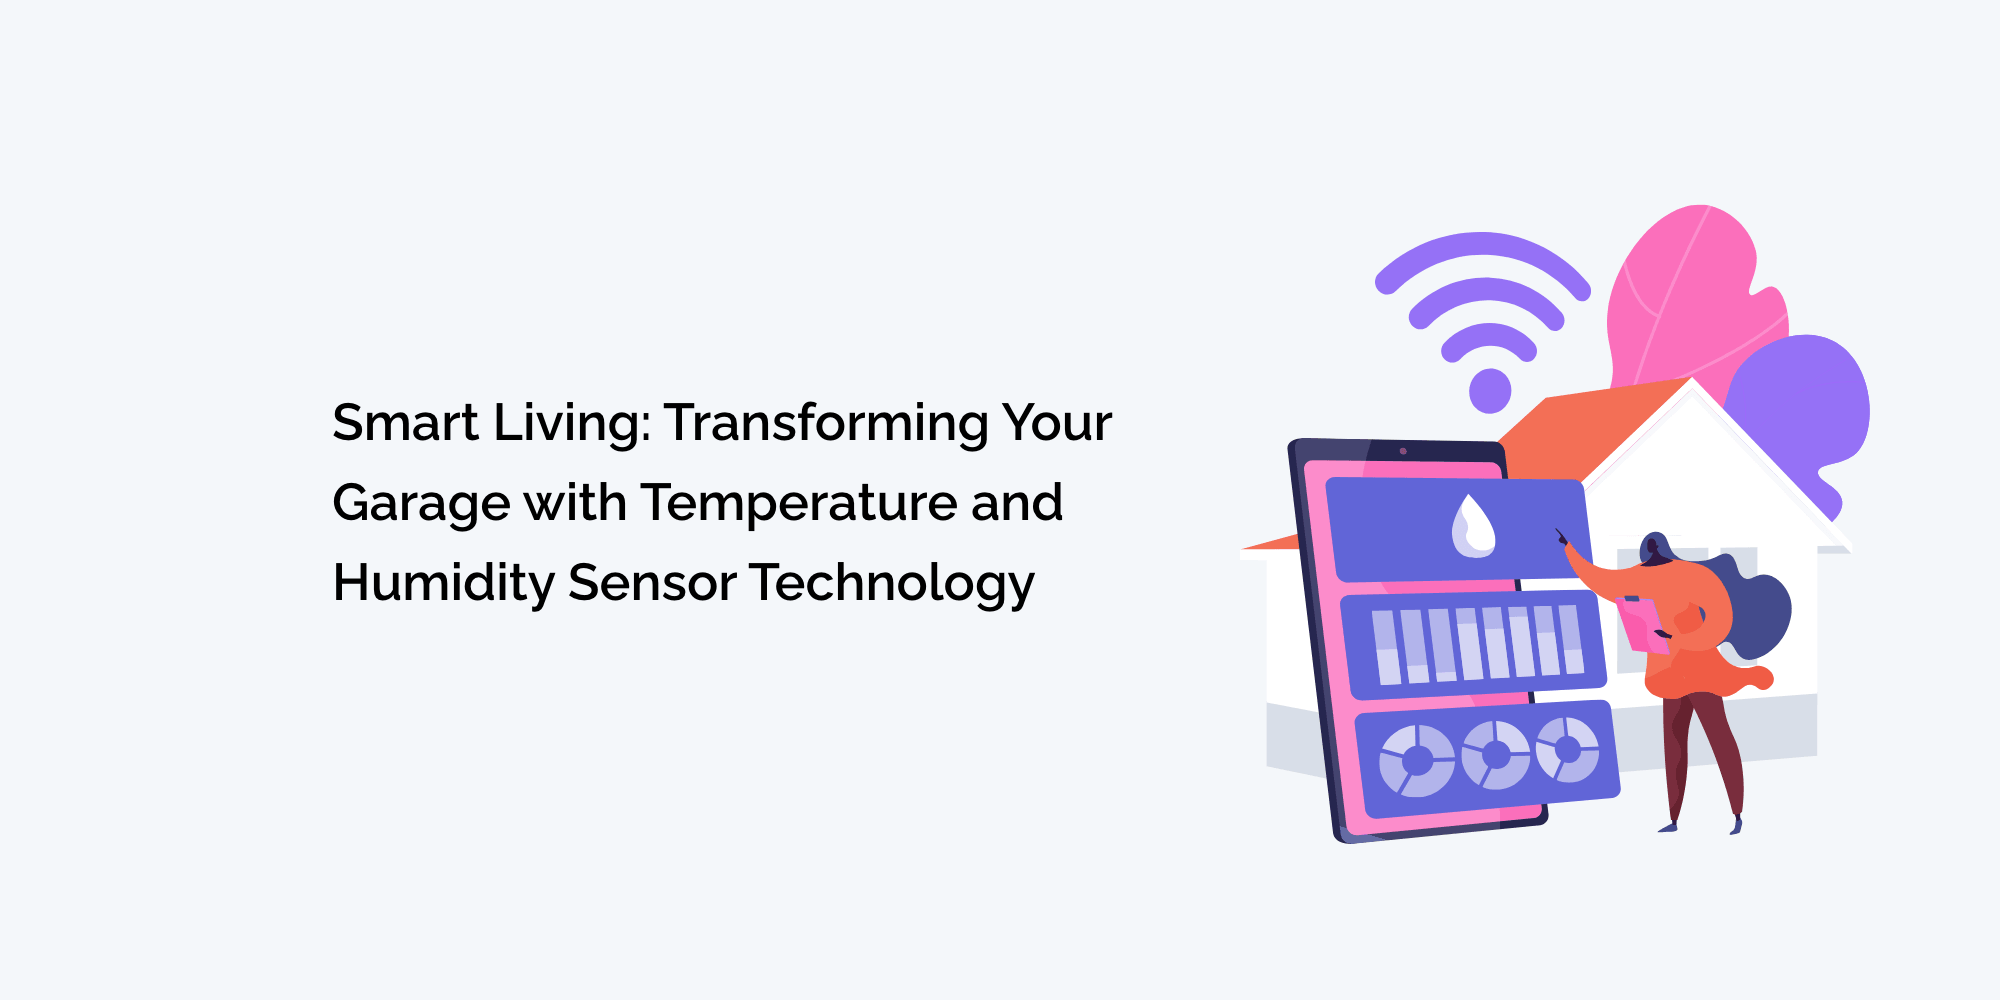 Smart Living: Transforming Your Garage with Temperature and Humidity Sensor Technology